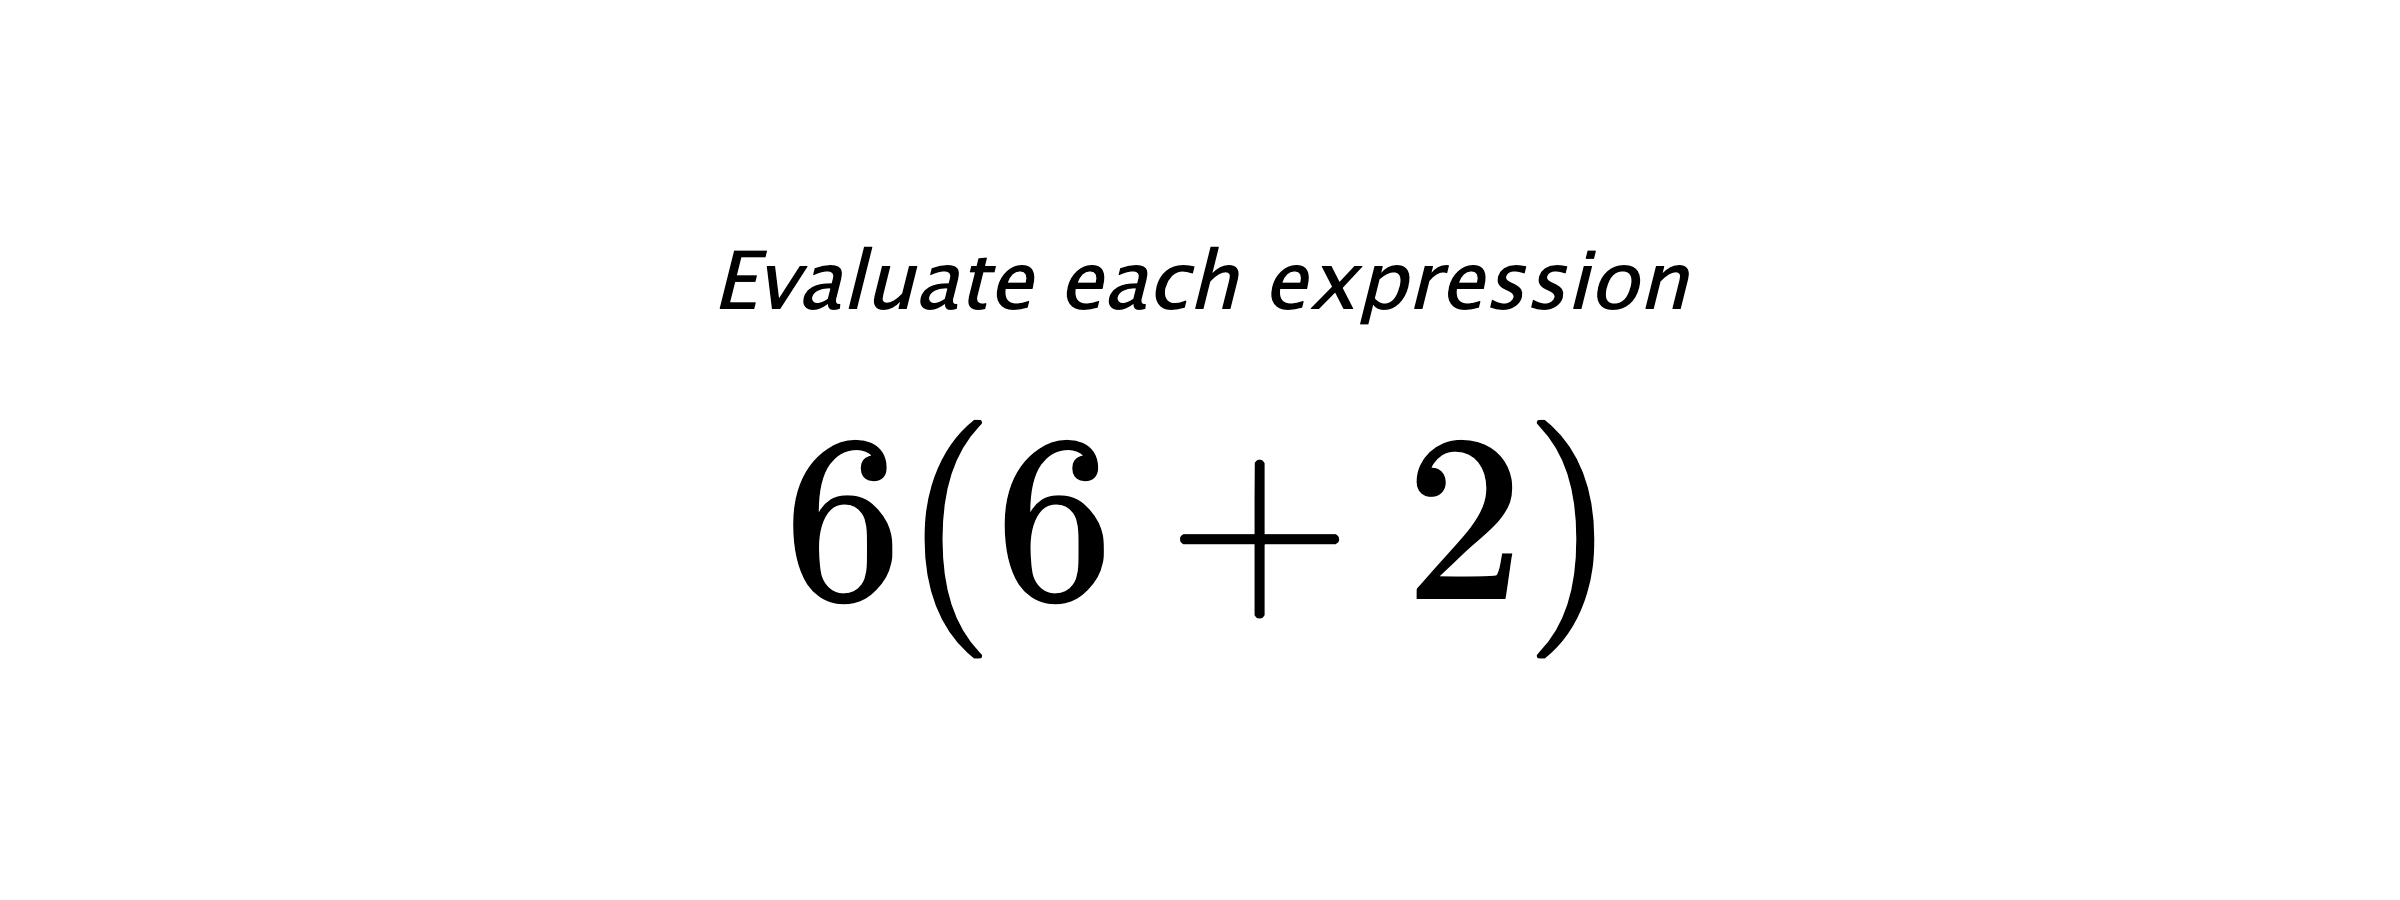 Evaluate each expression $ 6(6+2) $